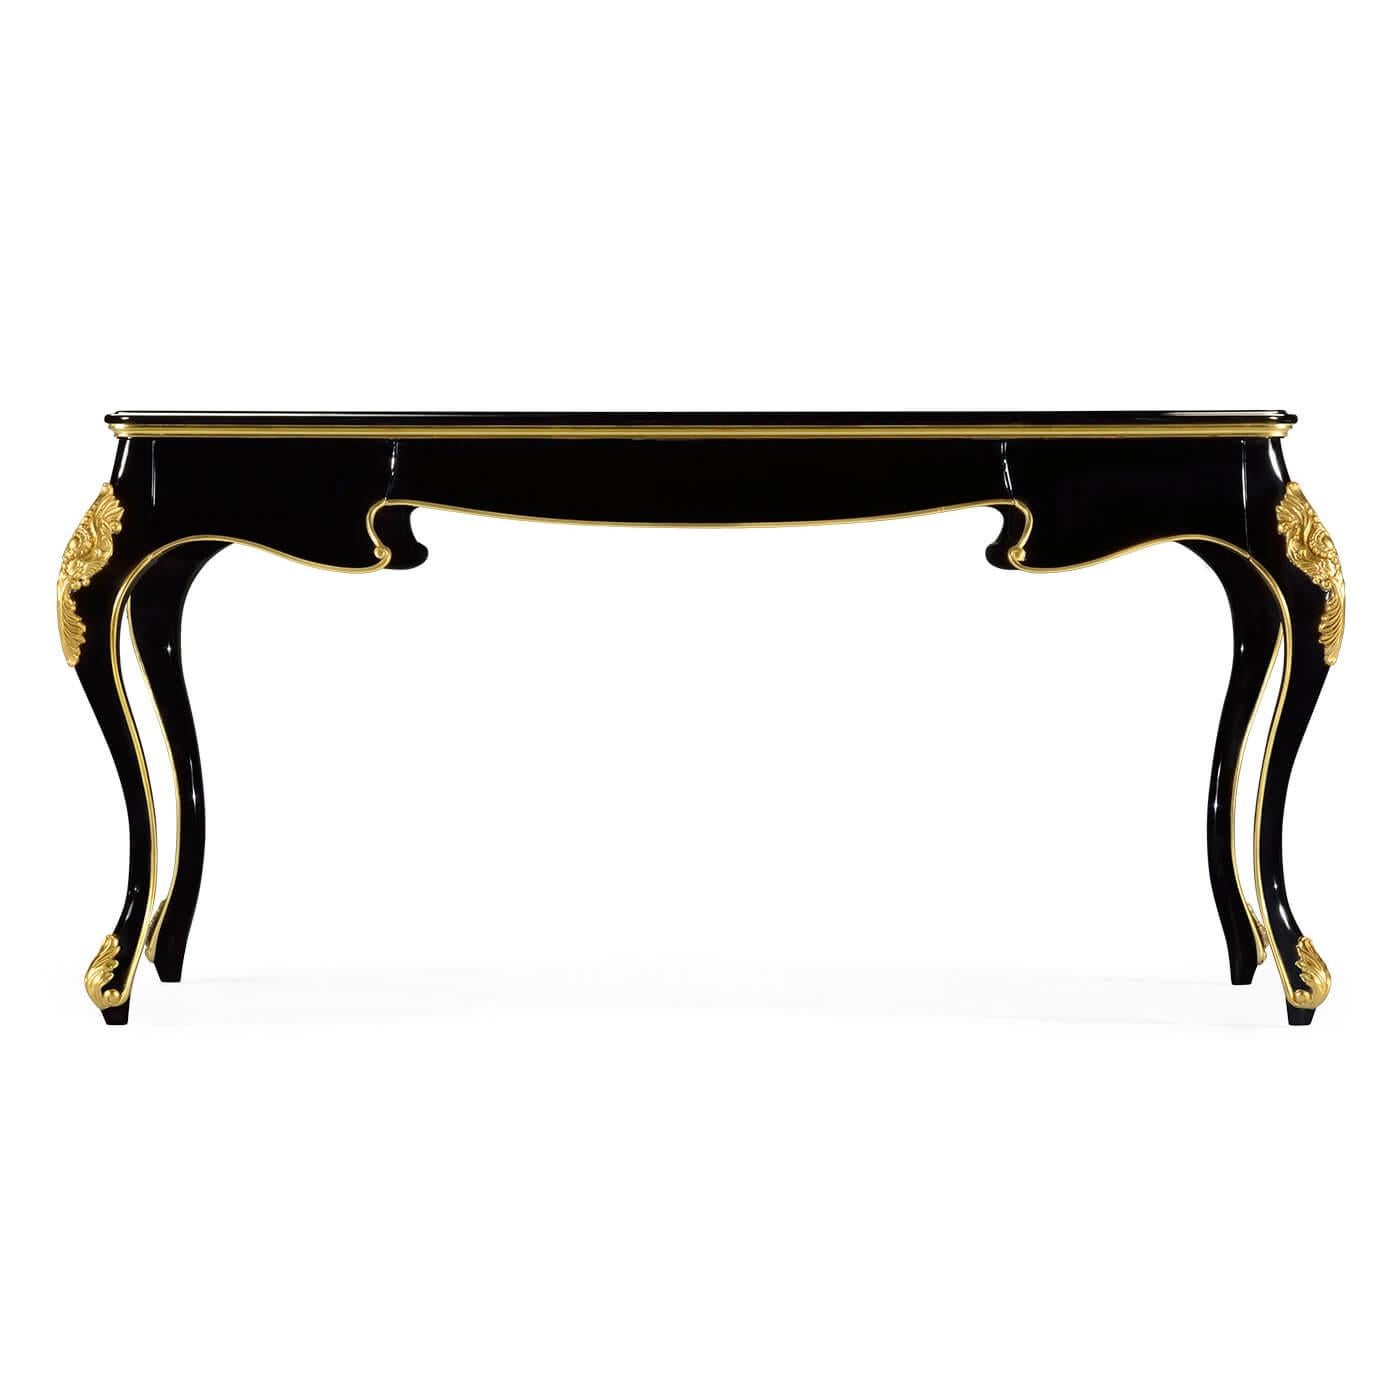 An English Rococo black lacquered desk with gilt-tooled red leather top, carved and gilded decorations with three shaped frieze drawers and cabriole legs. 

Dimensions: 62.5